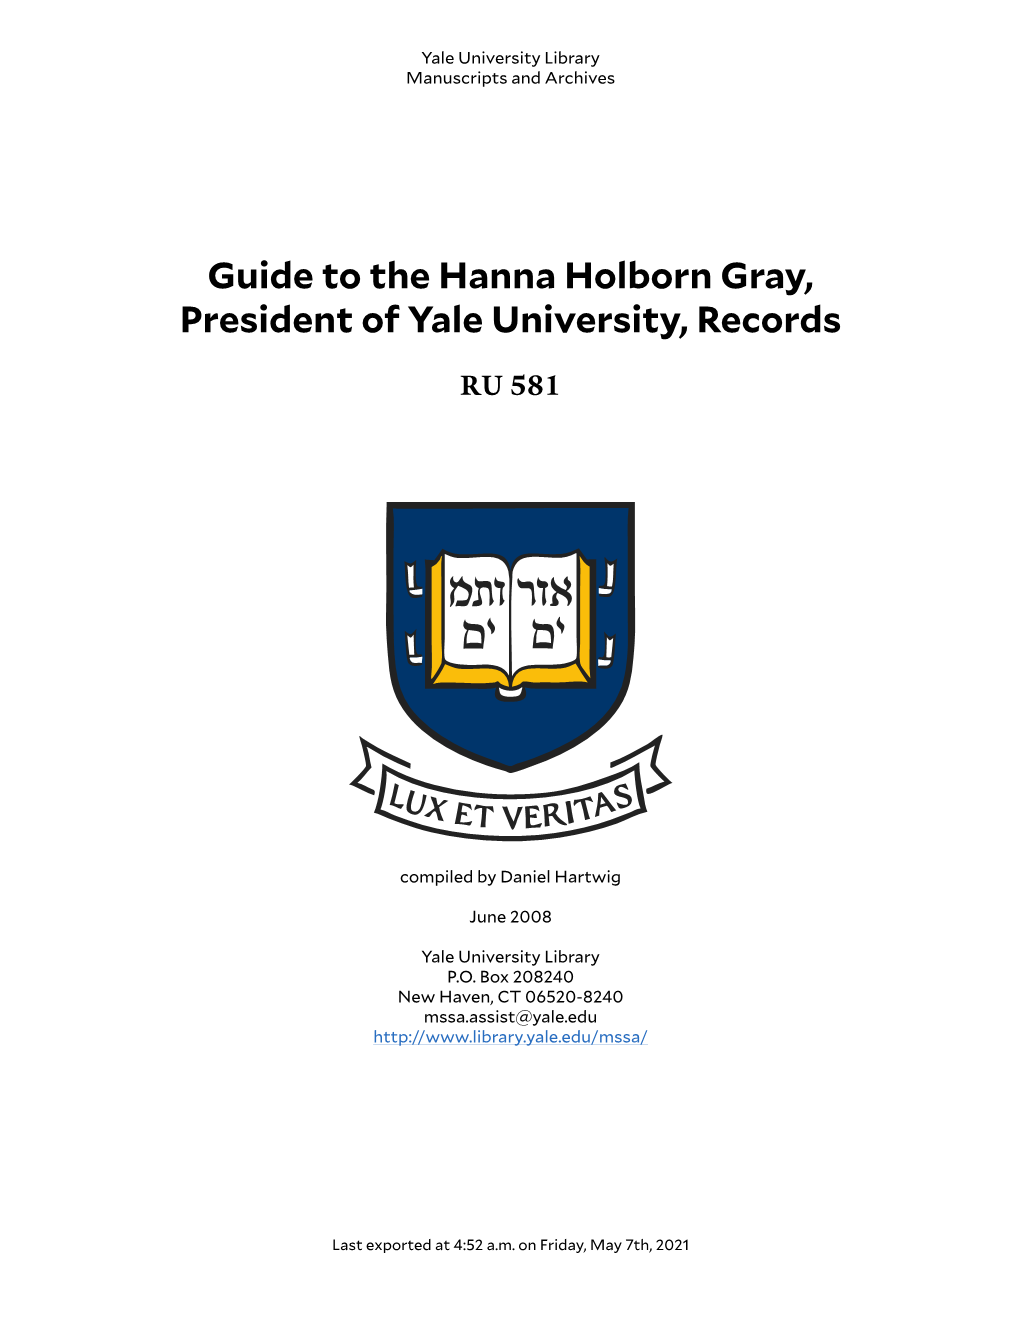 Guide to the Hanna Holborn Gray, President of Yale University, Records